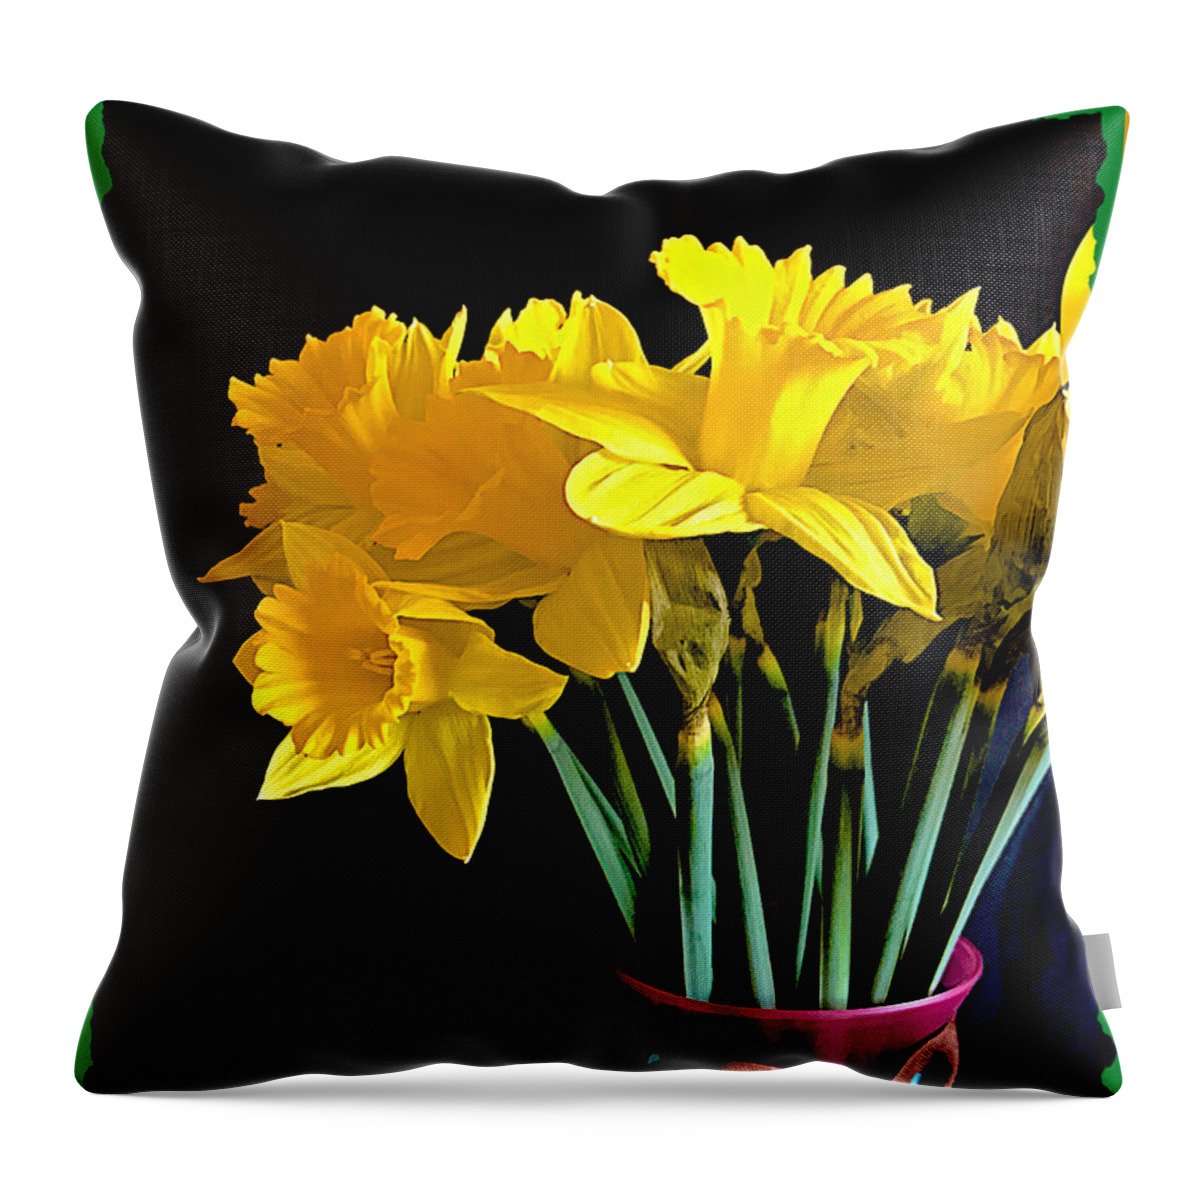 Narcissus Throw Pillow featuring the photograph Narcissus Bouquet by Barbara Zahno